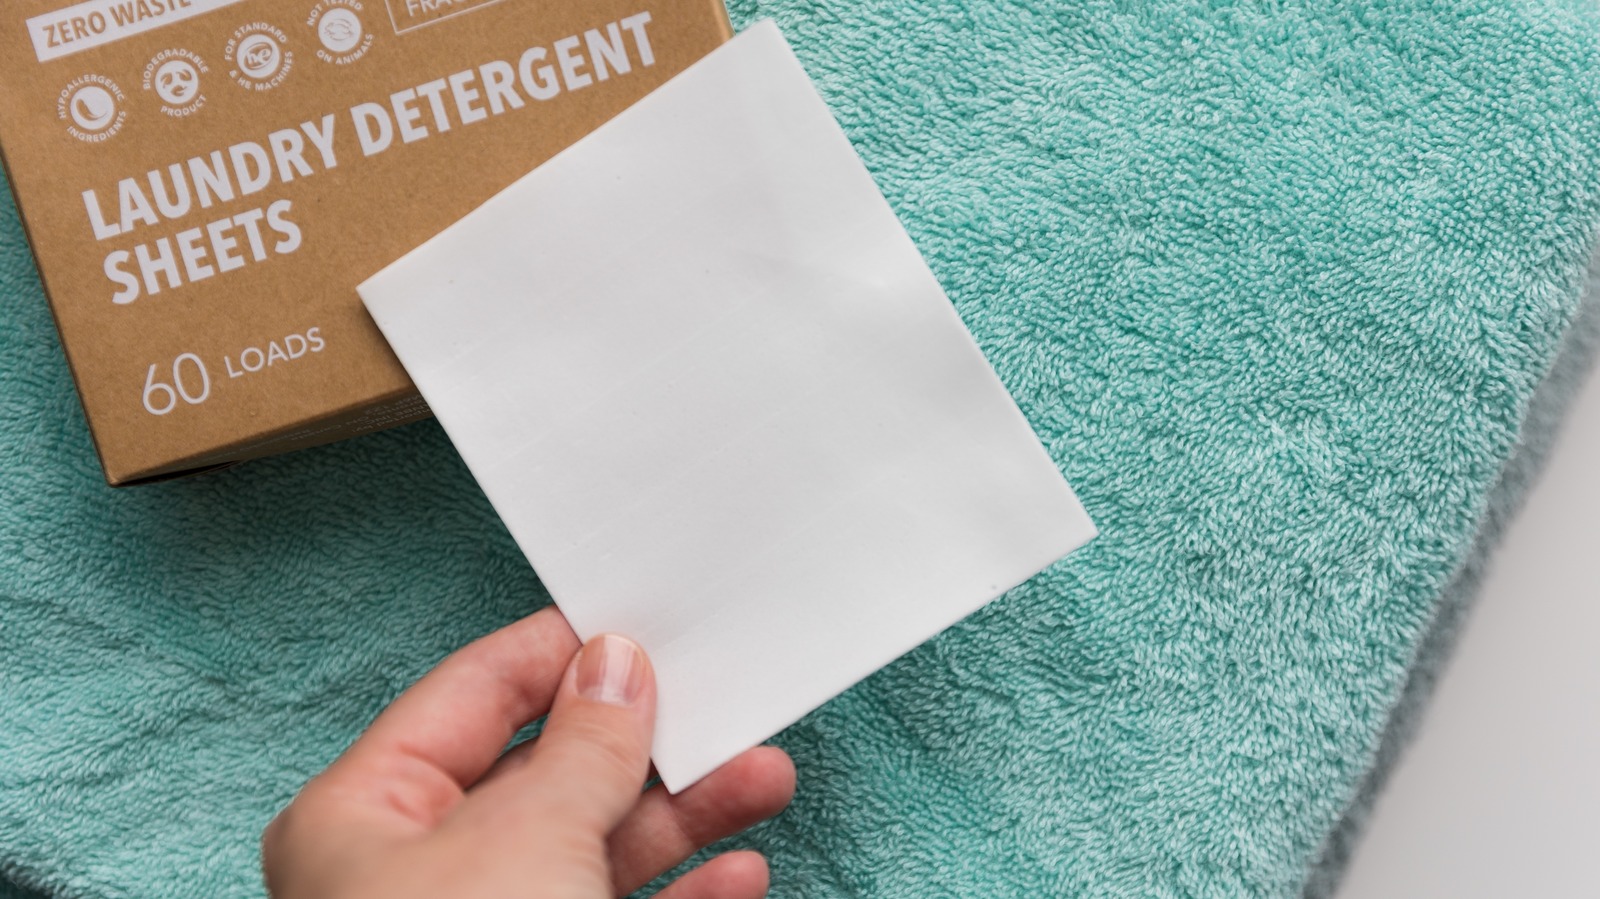 https://www.housedigest.com/img/gallery/the-hidden-downsides-of-using-laundry-detergent-sheets/l-intro-1696446459.jpg